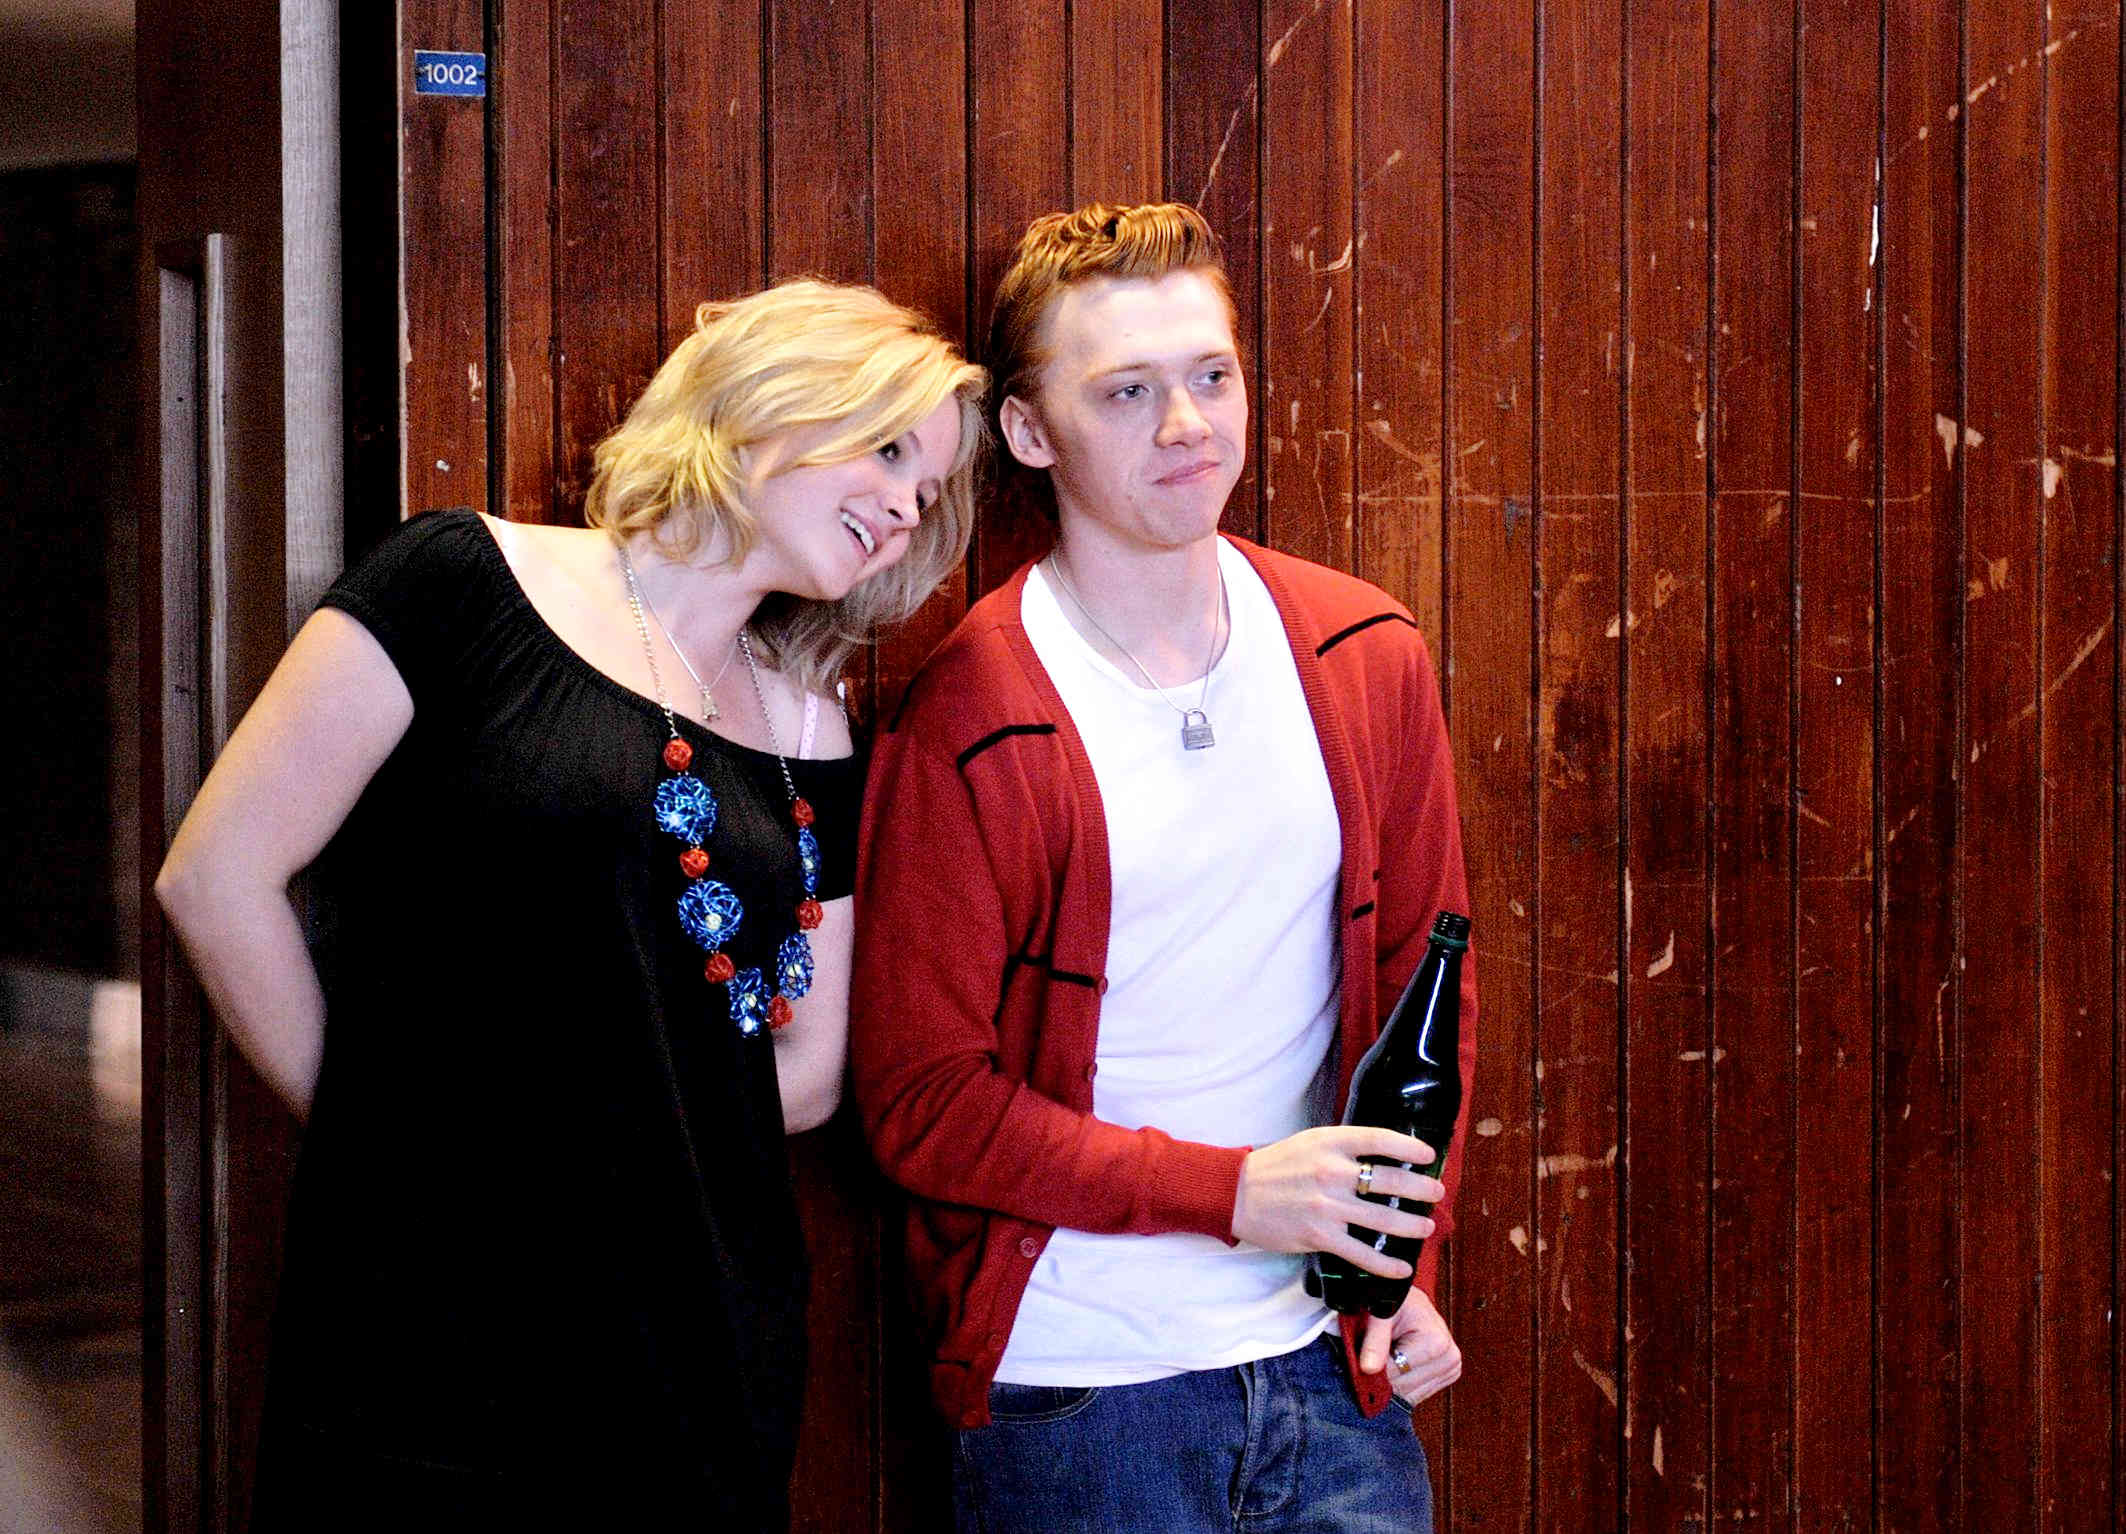 Kimberley Nixon stars as Michelle and Rupert Grint stars as Malachy in Little Film Company's Cherrybomb (2009)